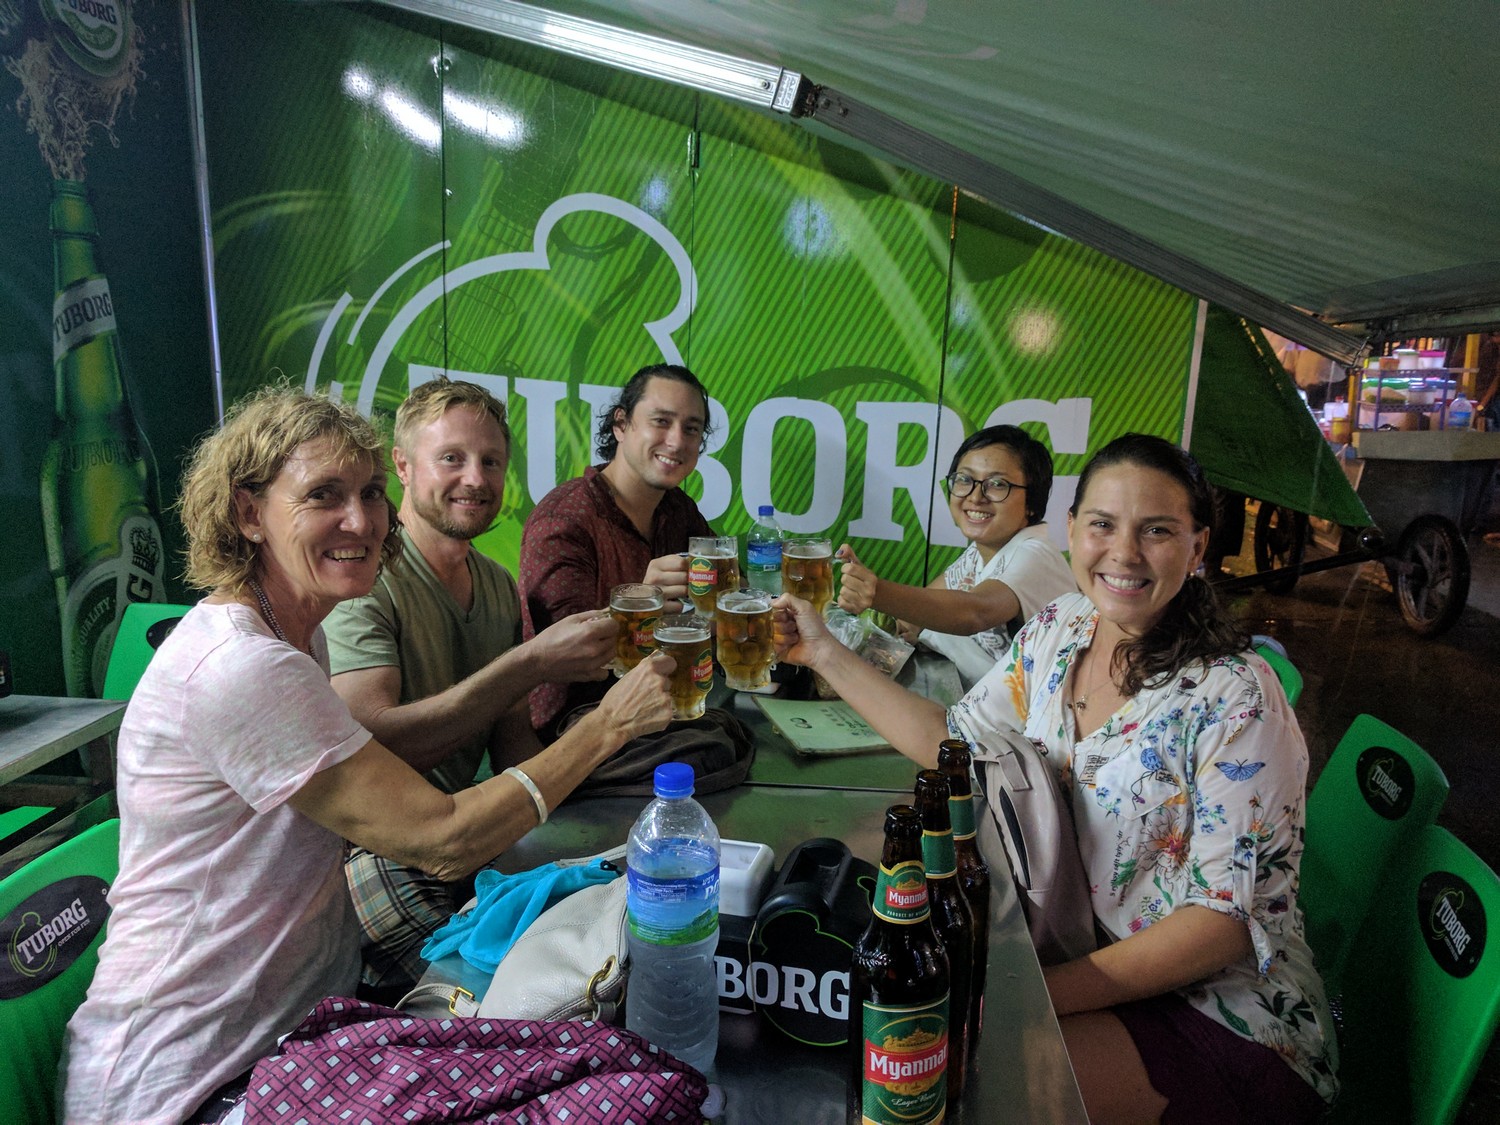 Yangon Food Tour in the evening at 19th Street